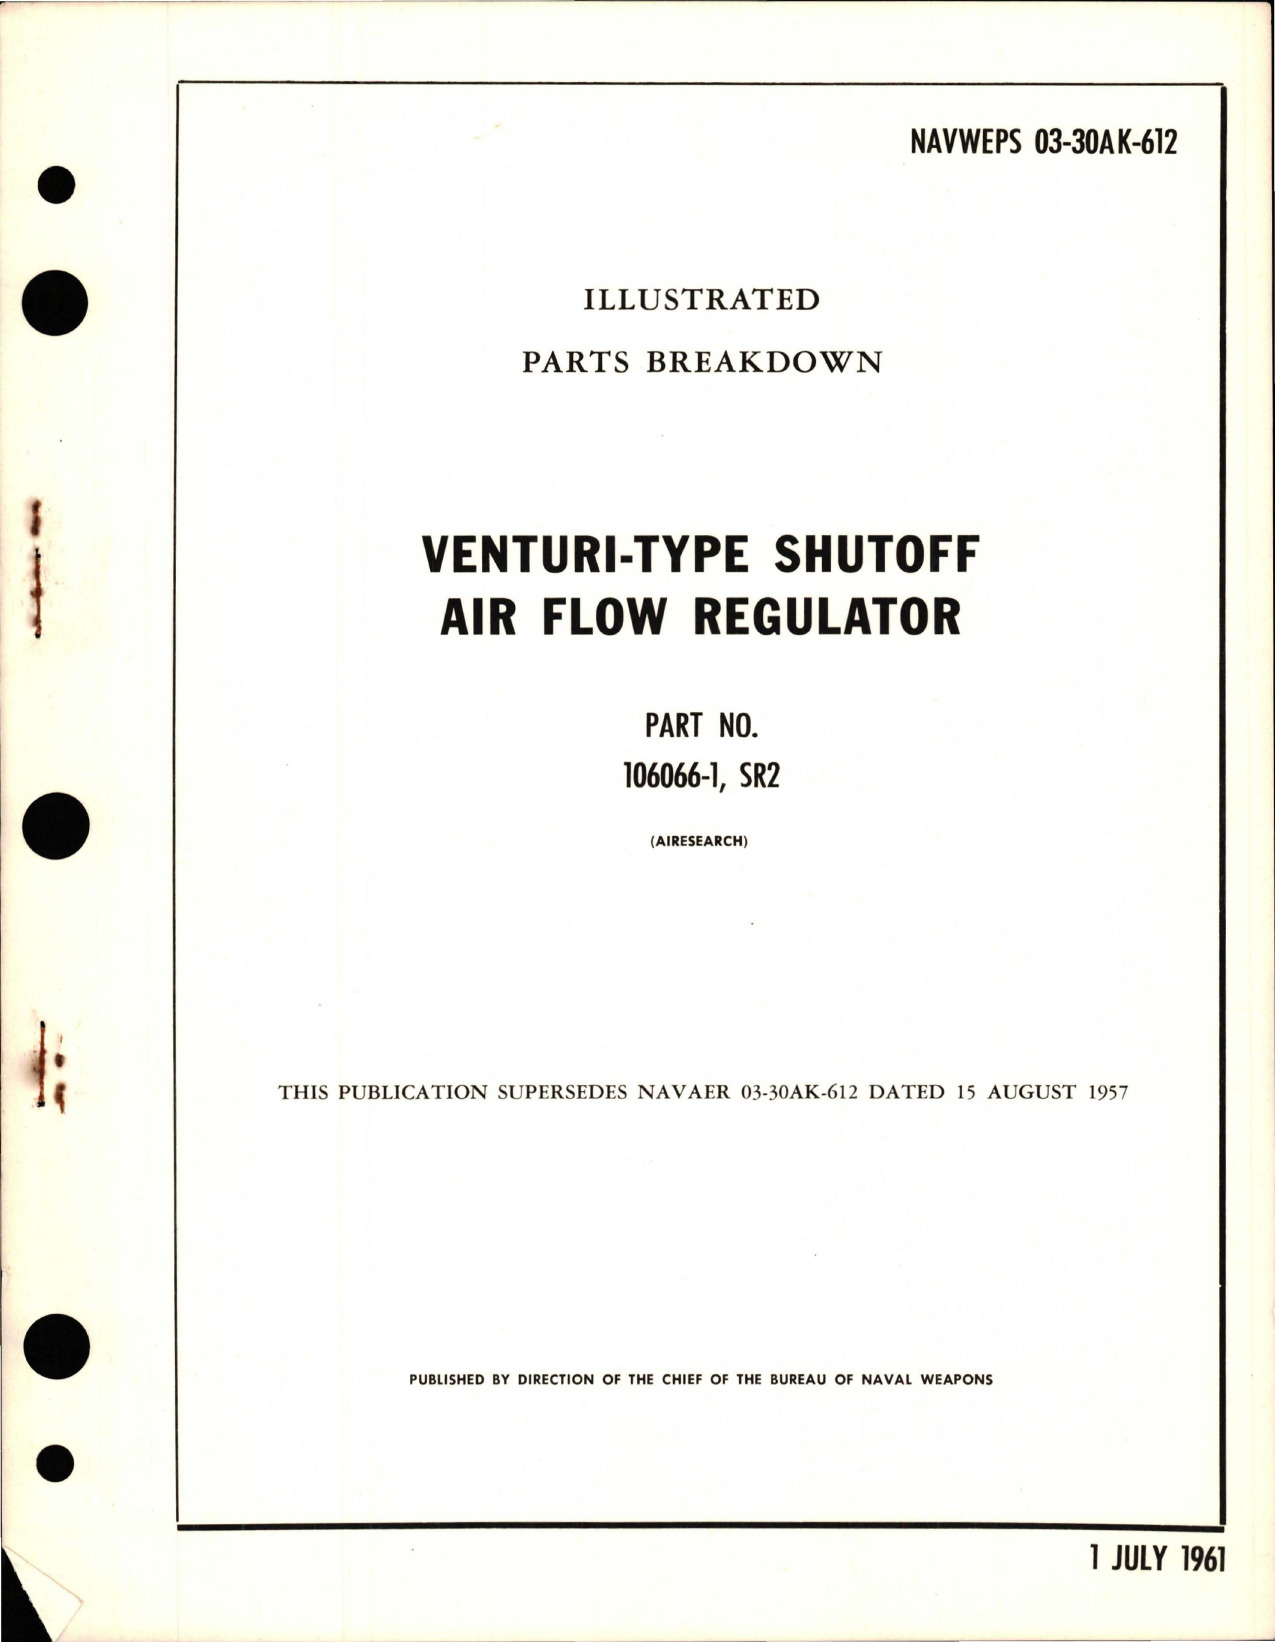 Sample page 1 from AirCorps Library document: Illustrated Parts Breakdown for Venturi-Type Shutoff Air Flow Regulator - Part 106066-1, SR2